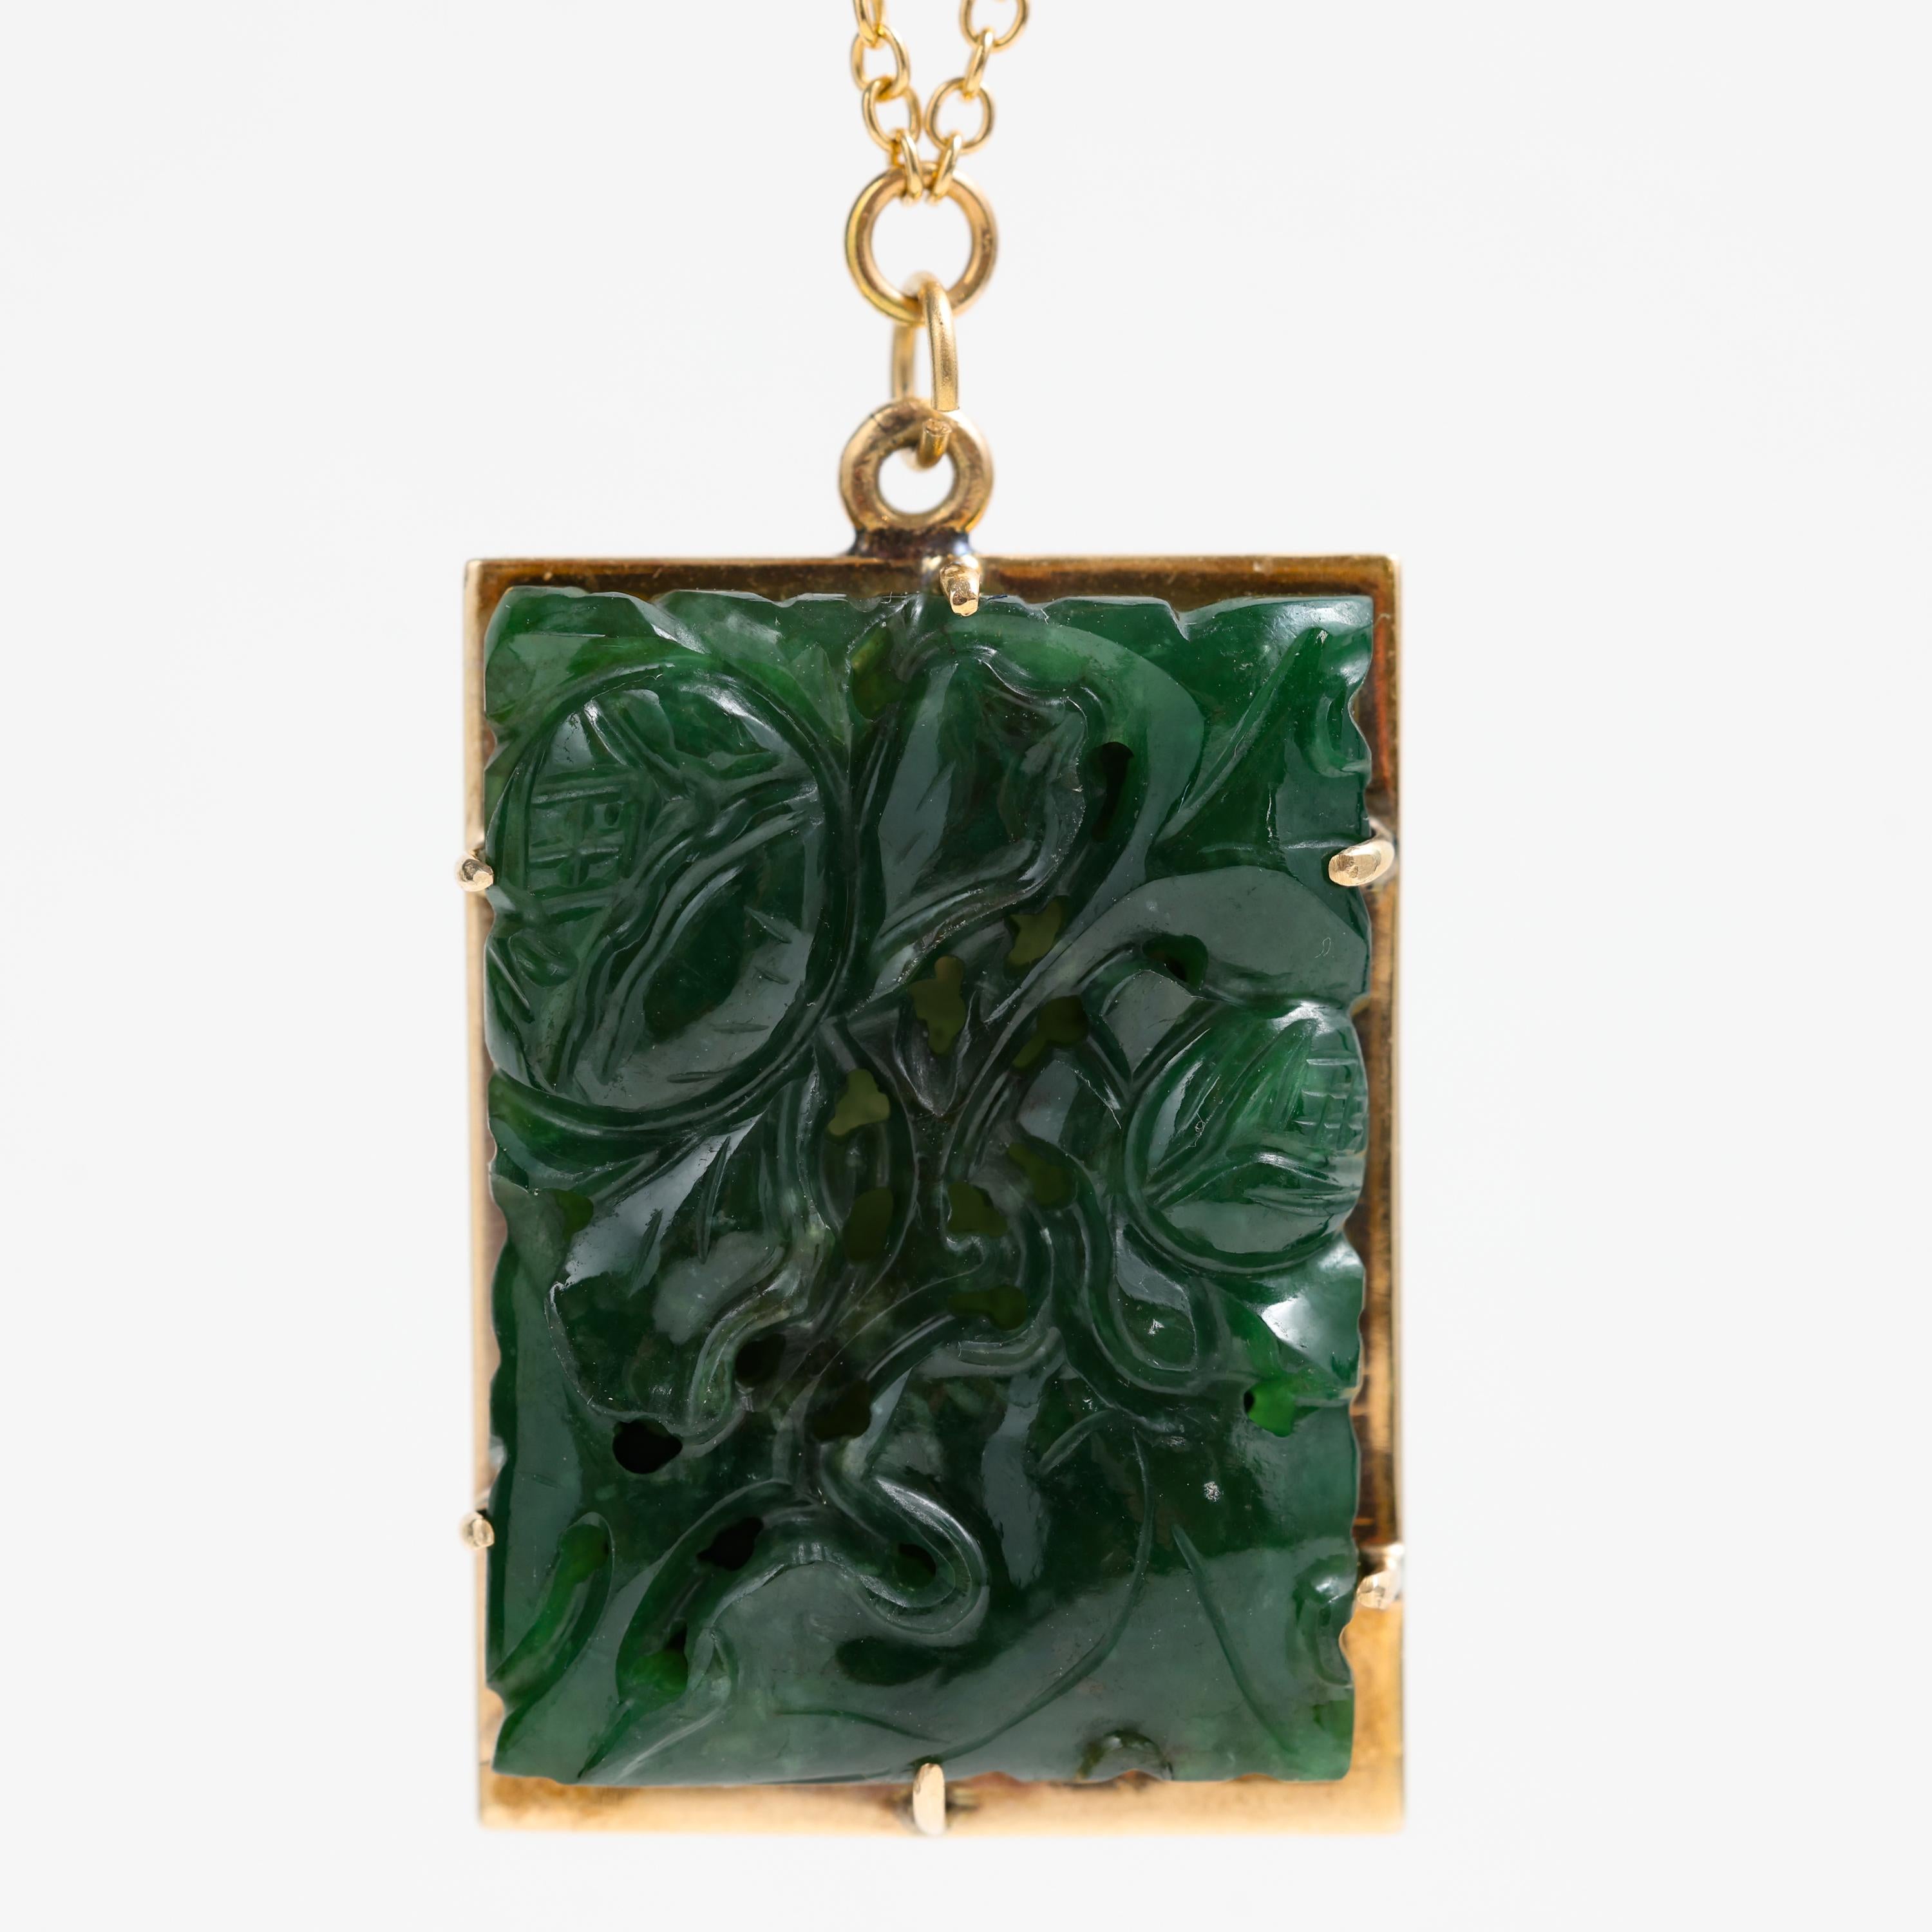 A gorgeous natural and untreated omphacite jade pendant from the midcentury -circa 1950. Created in Hong Kong, the jade has been carved and pierced into a floral motif. The tone of the green is a deep, rich forest green. 

The jade carving itself